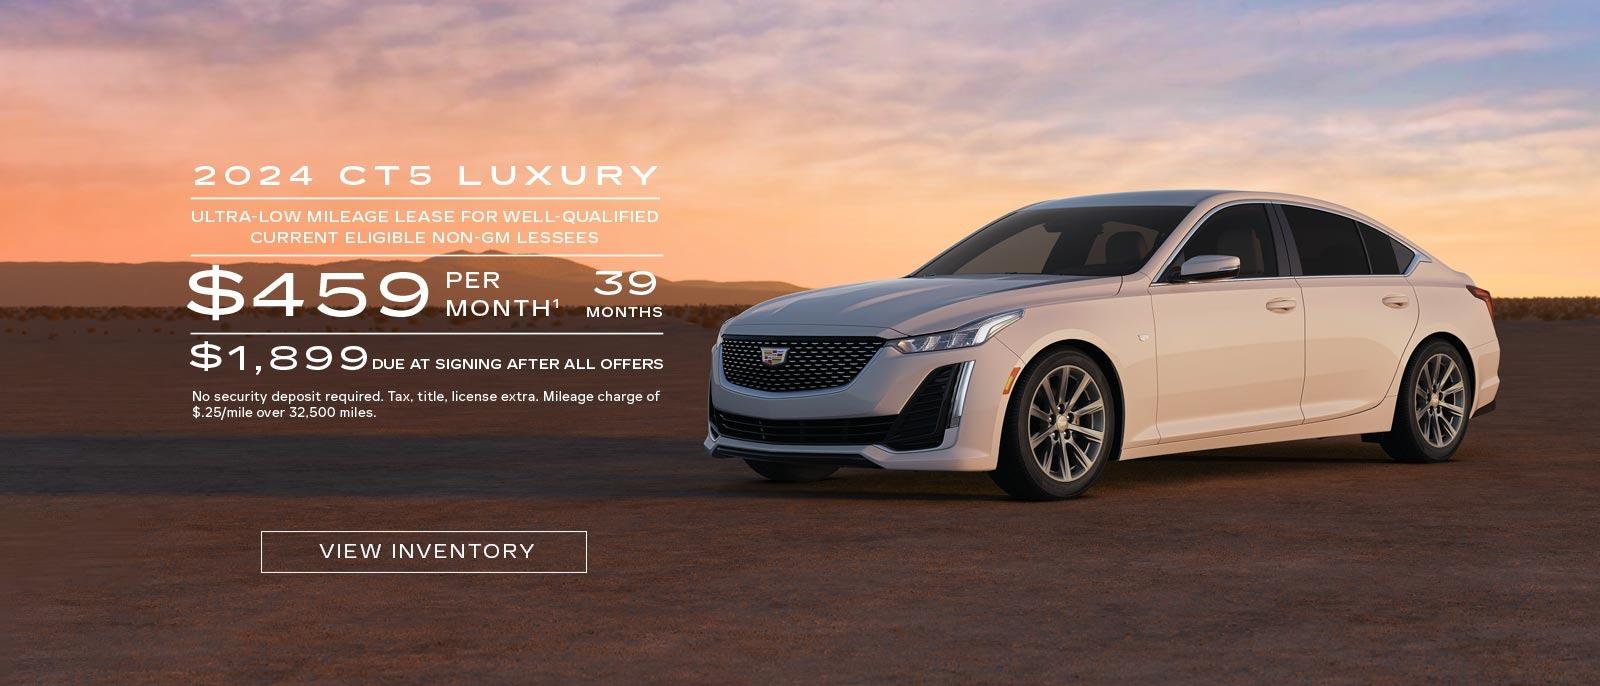 2024 CT5 LUXURY ULTRA-LOW MILEAGE LEASE FOR WELL-QUALIFIED CURRENT ELIGIBLE NON-GM LESSEES PER $459  MONTH¹ 39 MONTHS $1,899 DUE DUE AT SIGNING AFTER ALL OFFERS No security deposit required. Tax, title, license extra. Mileage charge of $.25/mile over 32,500 miles.